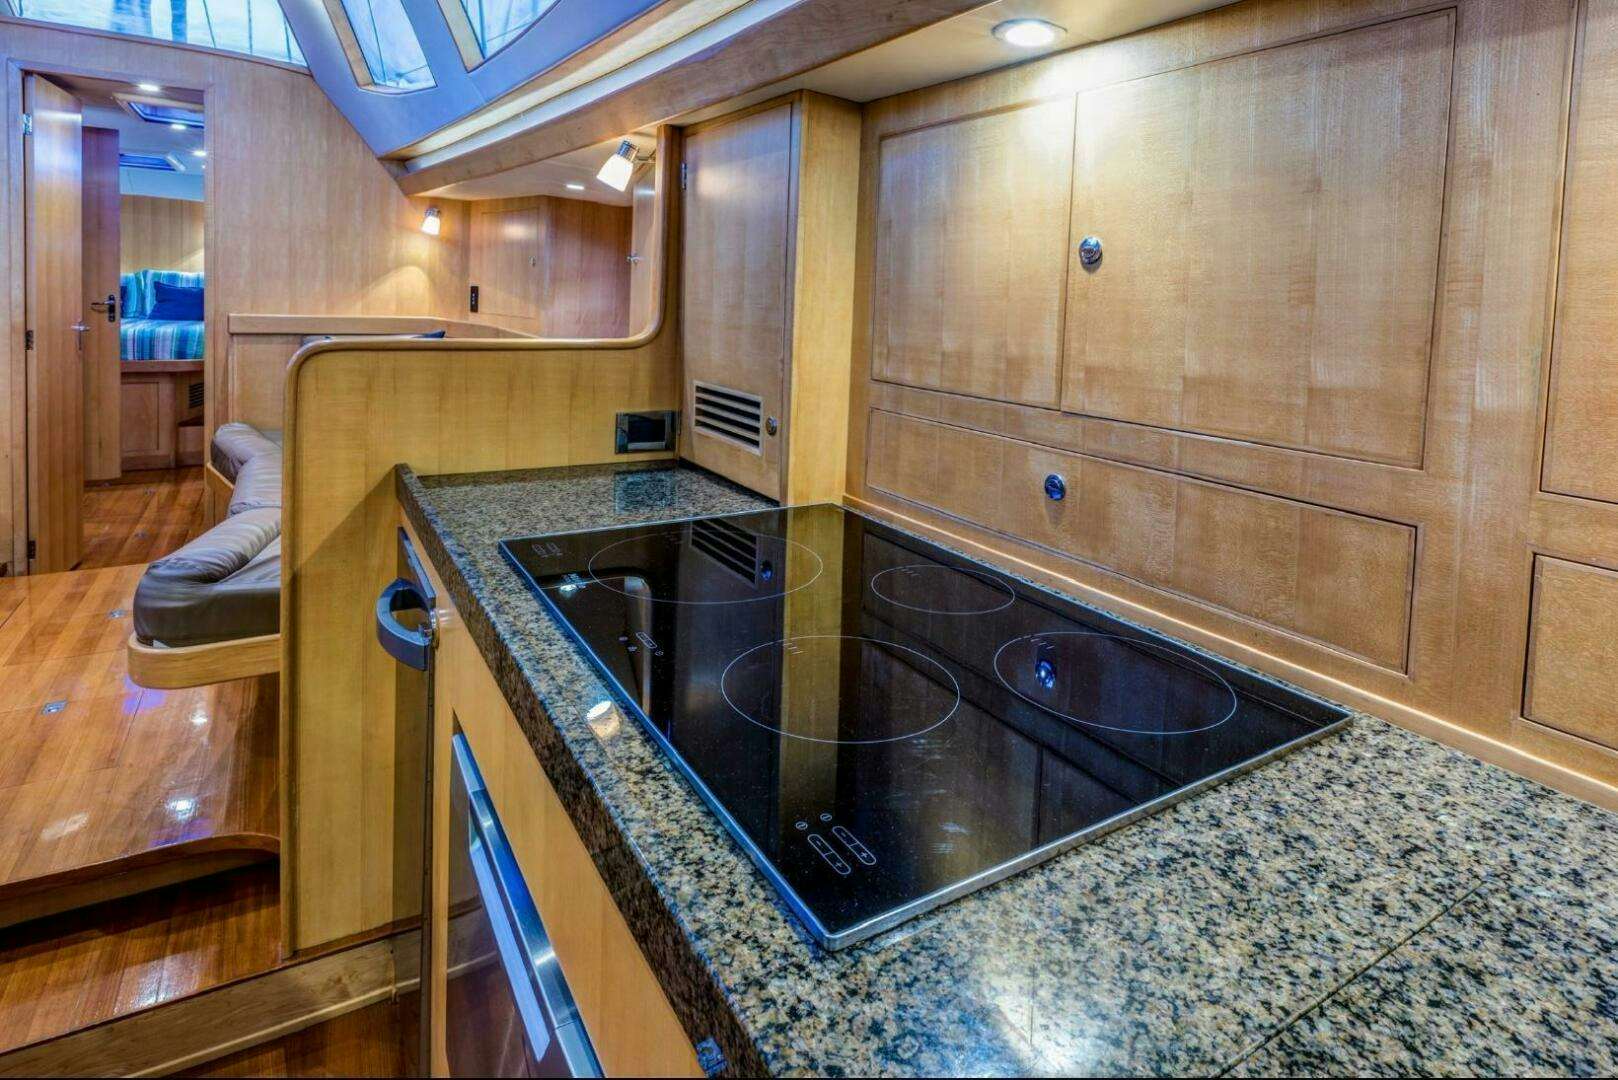 The glass slipper
Yacht for Sale